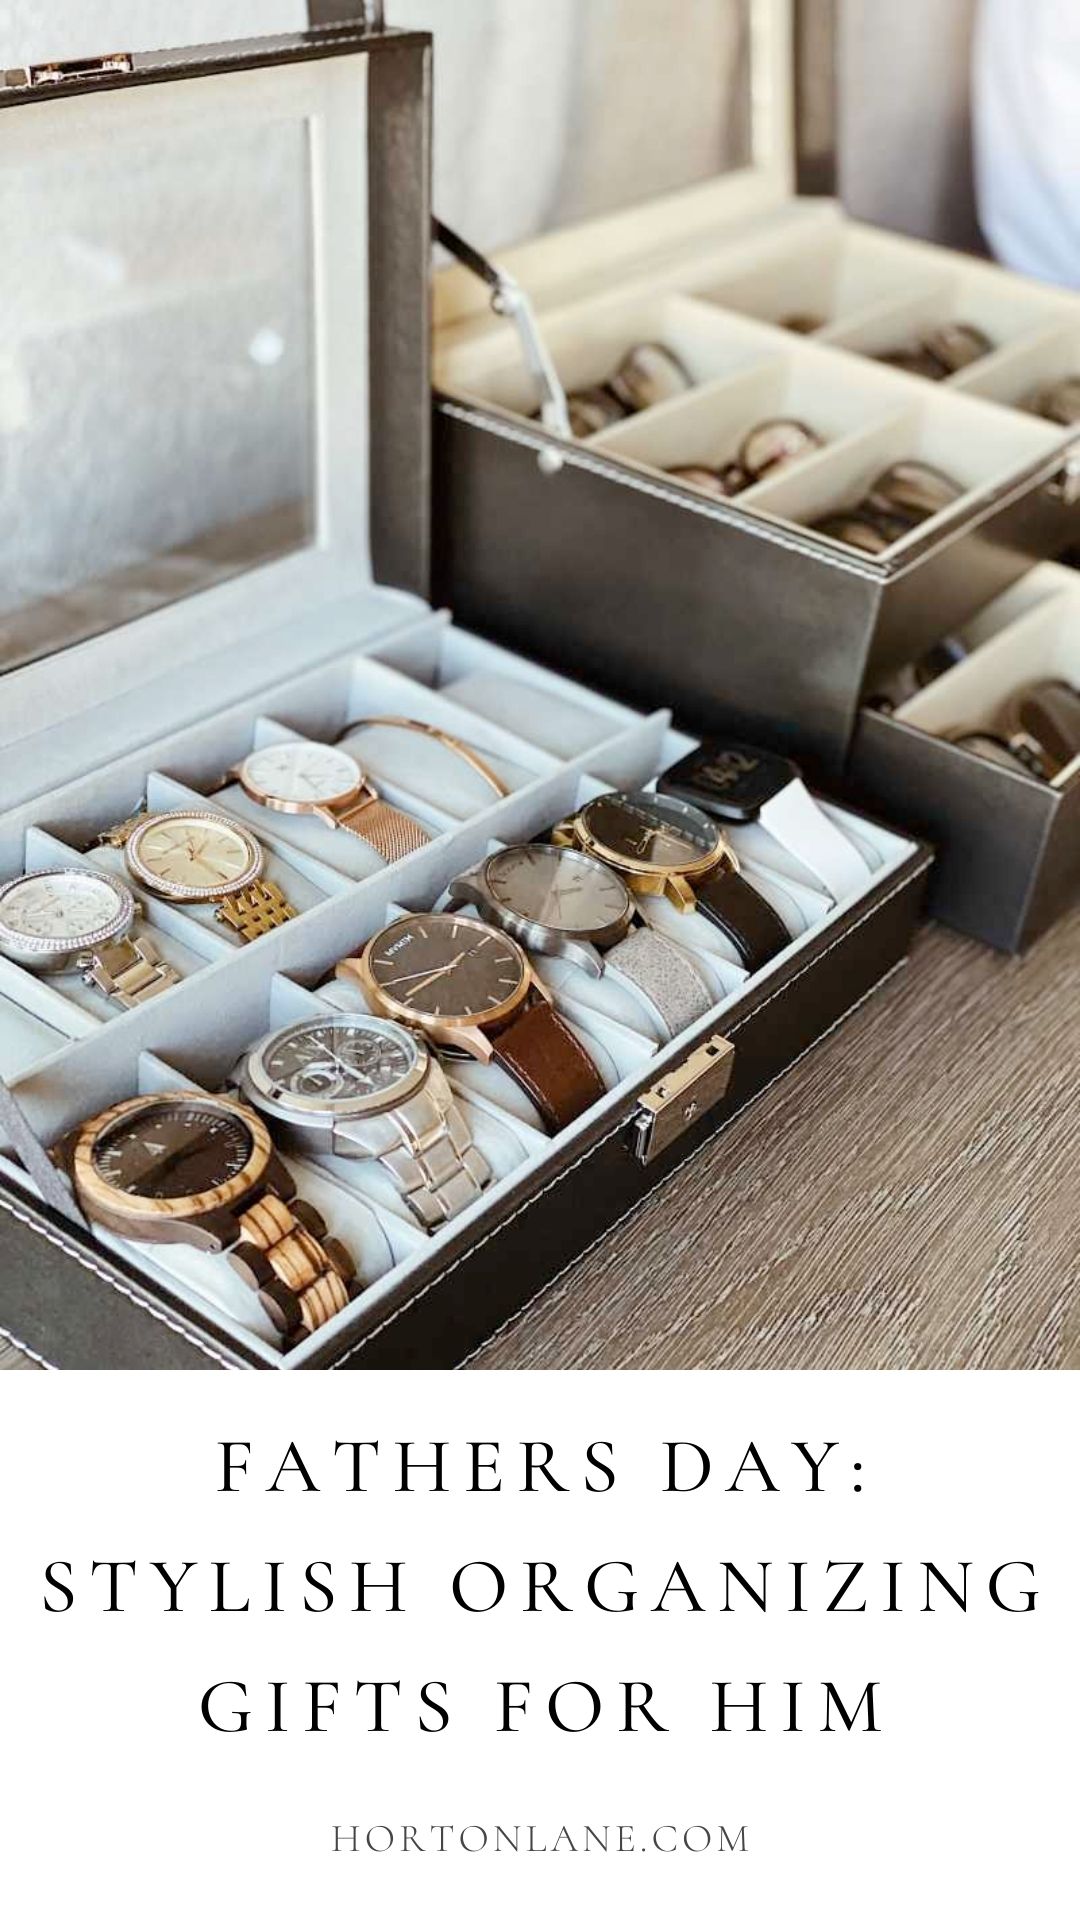 Pinterest Pin-Father's Day Gift Idea Stylish Organzing gifts for him from amazon